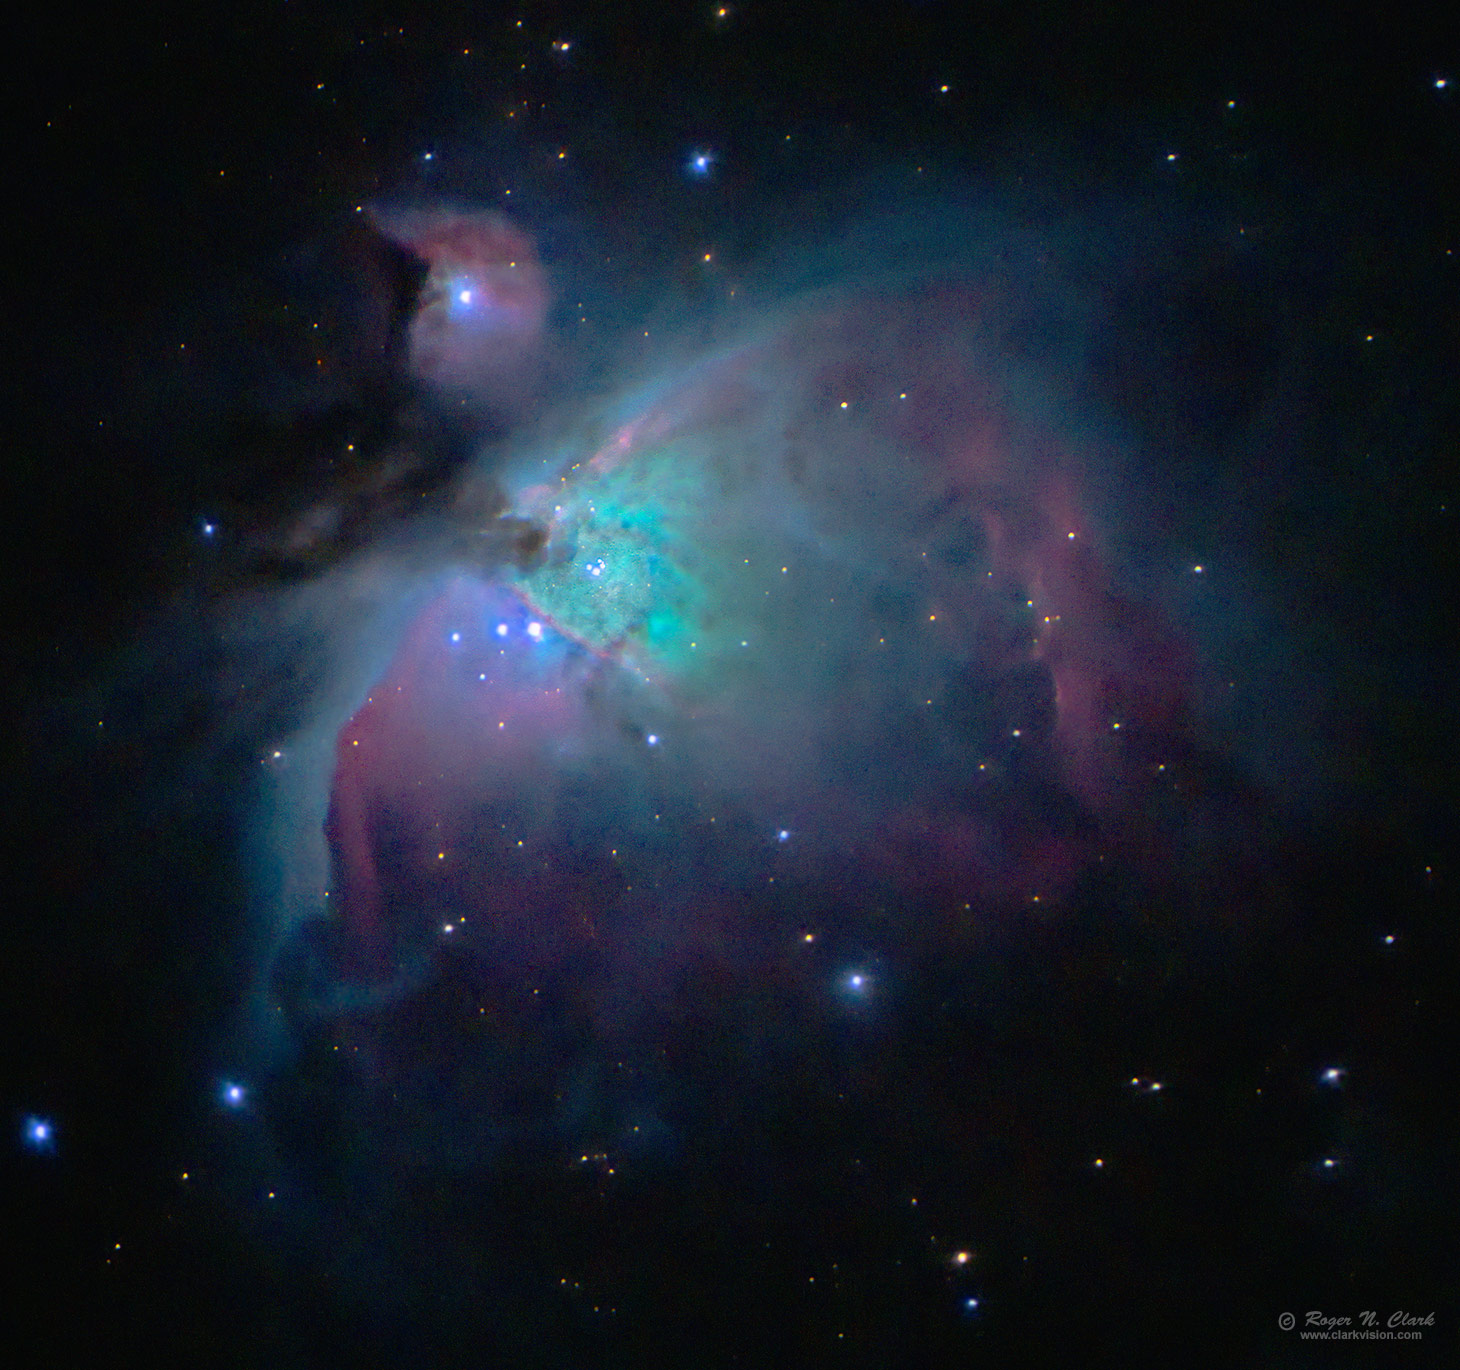 image m42-trapezium-rnclark-canon90d-600mm-c02-07-2023-116sec-b8.j-c1-0.7xs.jpg is Copyrighted by Roger N. Clark, www.clarkvision.com